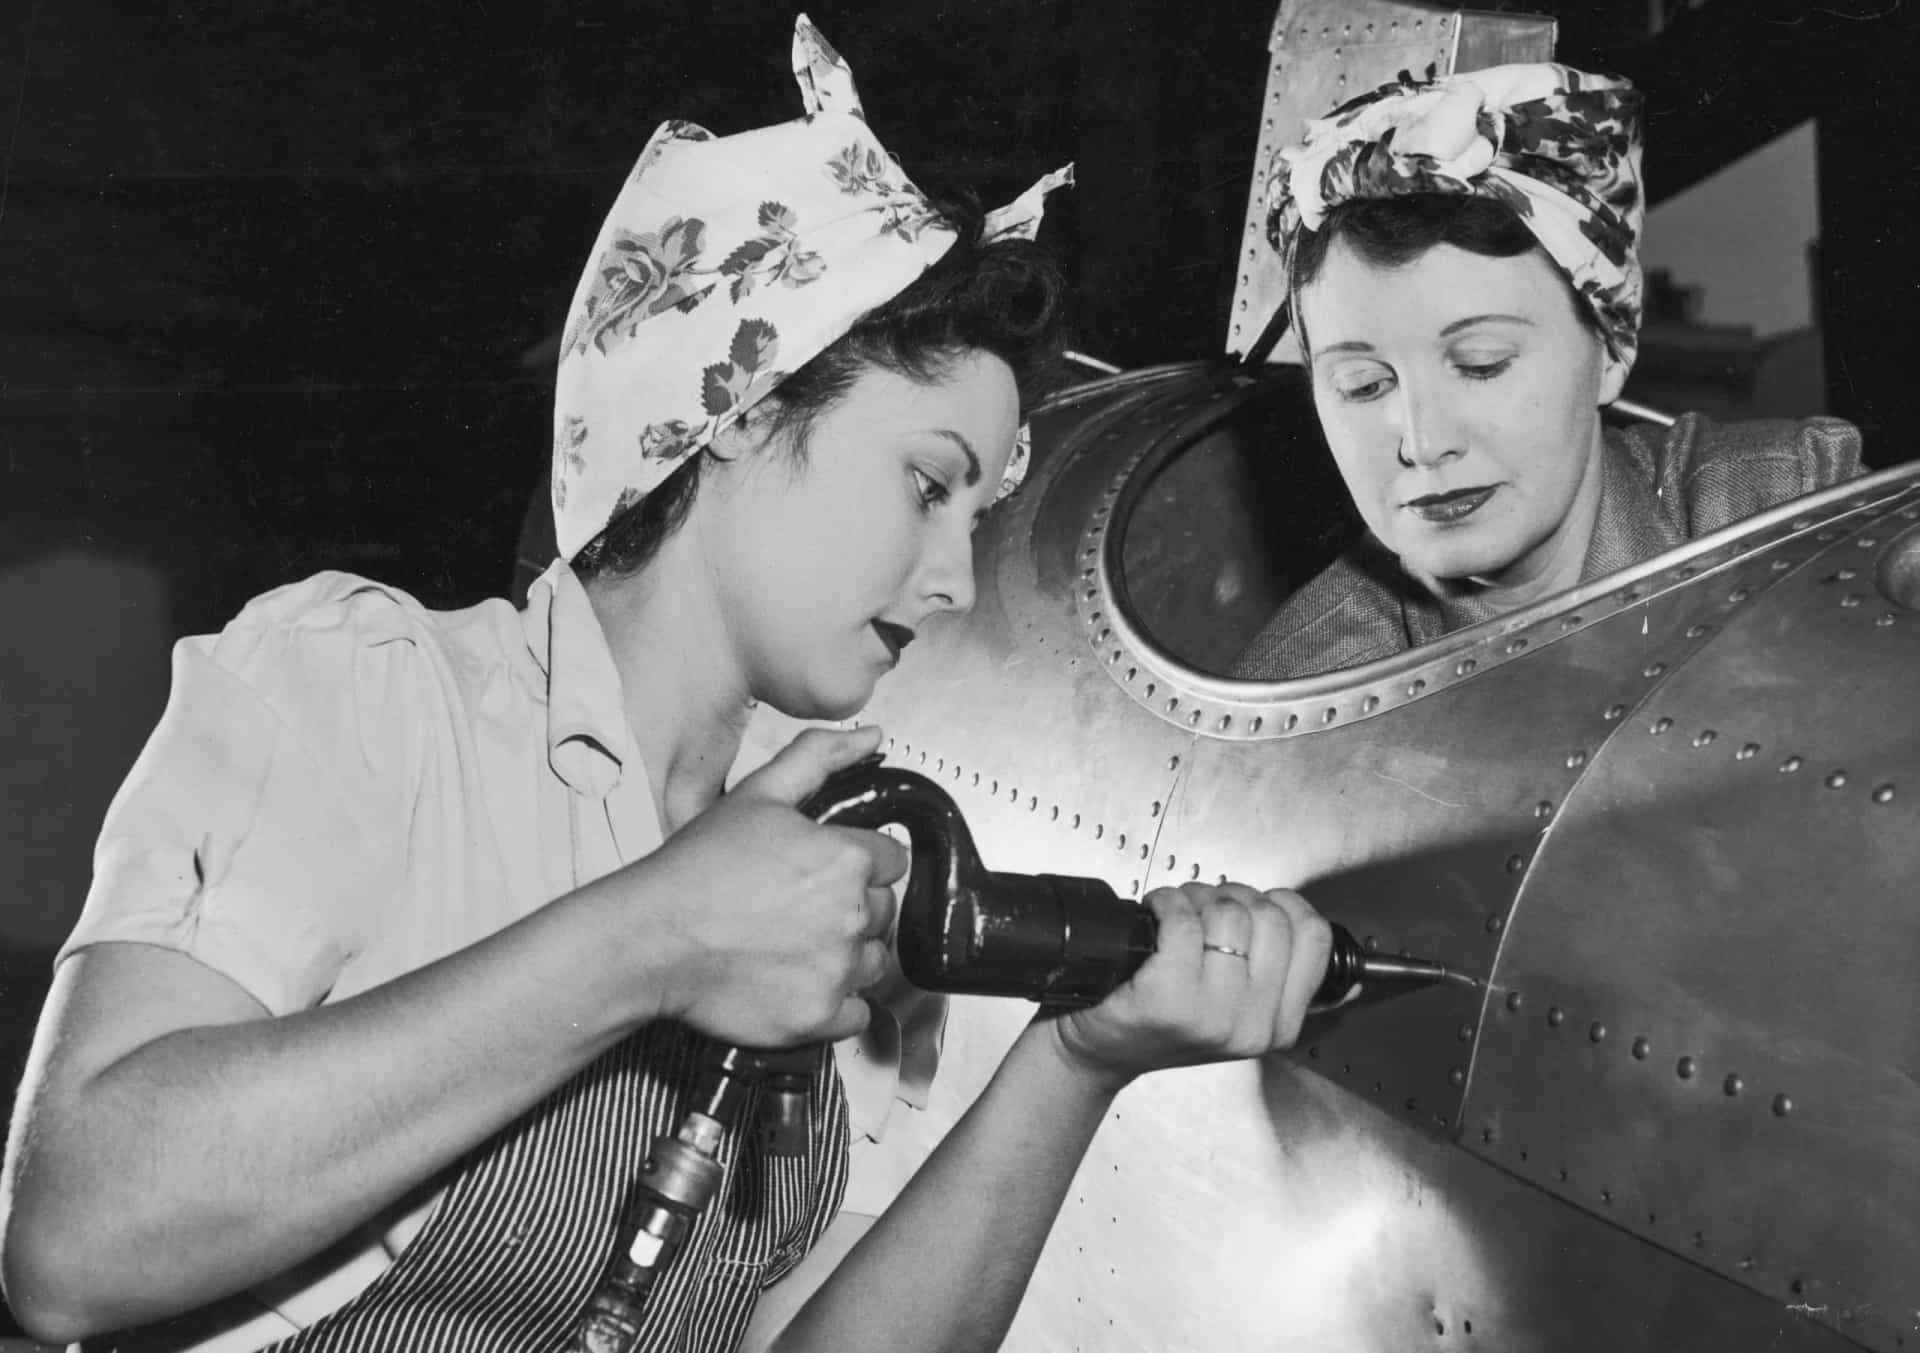 <p>An American female worker drives rivets into an aircraft while another sits in the cockpit checking they've been securely fastened. The women wear aprons and their hair is tucked into scarves. A woman who went to work in industries to aid the war effort and was assigned this particular role became affectionately known as Rosie the Riveter.</p><p>You may also like:<a href="https://www.starsinsider.com/n/177433?utm_source=msn.com&utm_medium=display&utm_campaign=referral_description&utm_content=517253en-us"> 11 cities around the world that may run out of water</a></p>